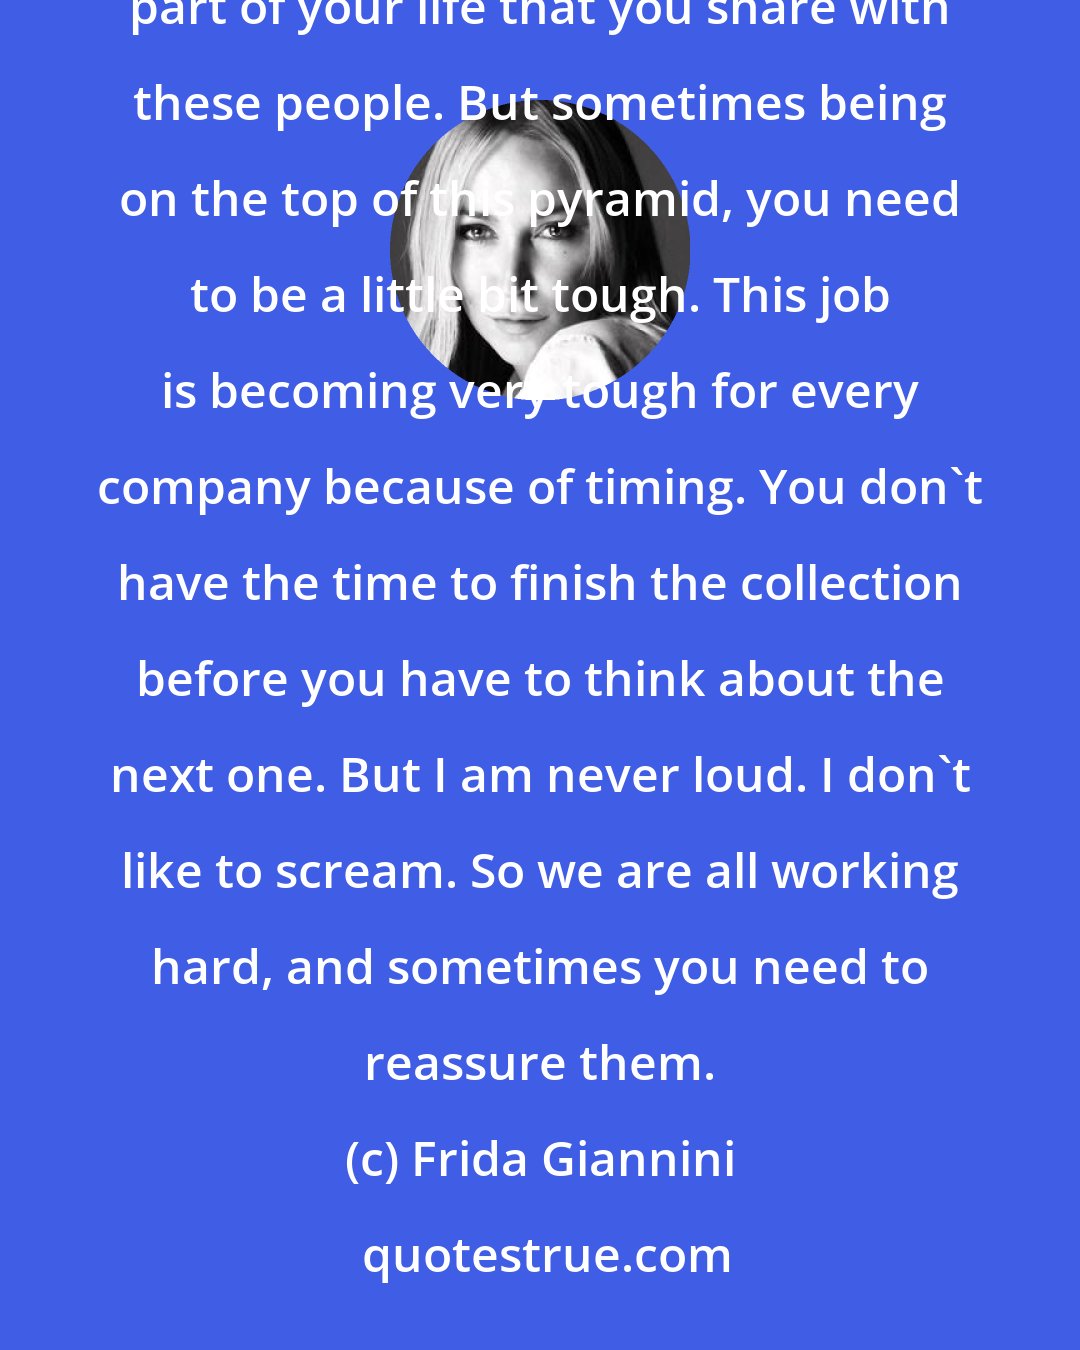 Frida Giannini: I'm used to spending a lot of time with my team. They're not only collaborators, they're also friends. It's the biggest part of your life that you share with these people. But sometimes being on the top of this pyramid, you need to be a little bit tough. This job is becoming very tough for every company because of timing. You don't have the time to finish the collection before you have to think about the next one. But I am never loud. I don't like to scream. So we are all working hard, and sometimes you need to reassure them.